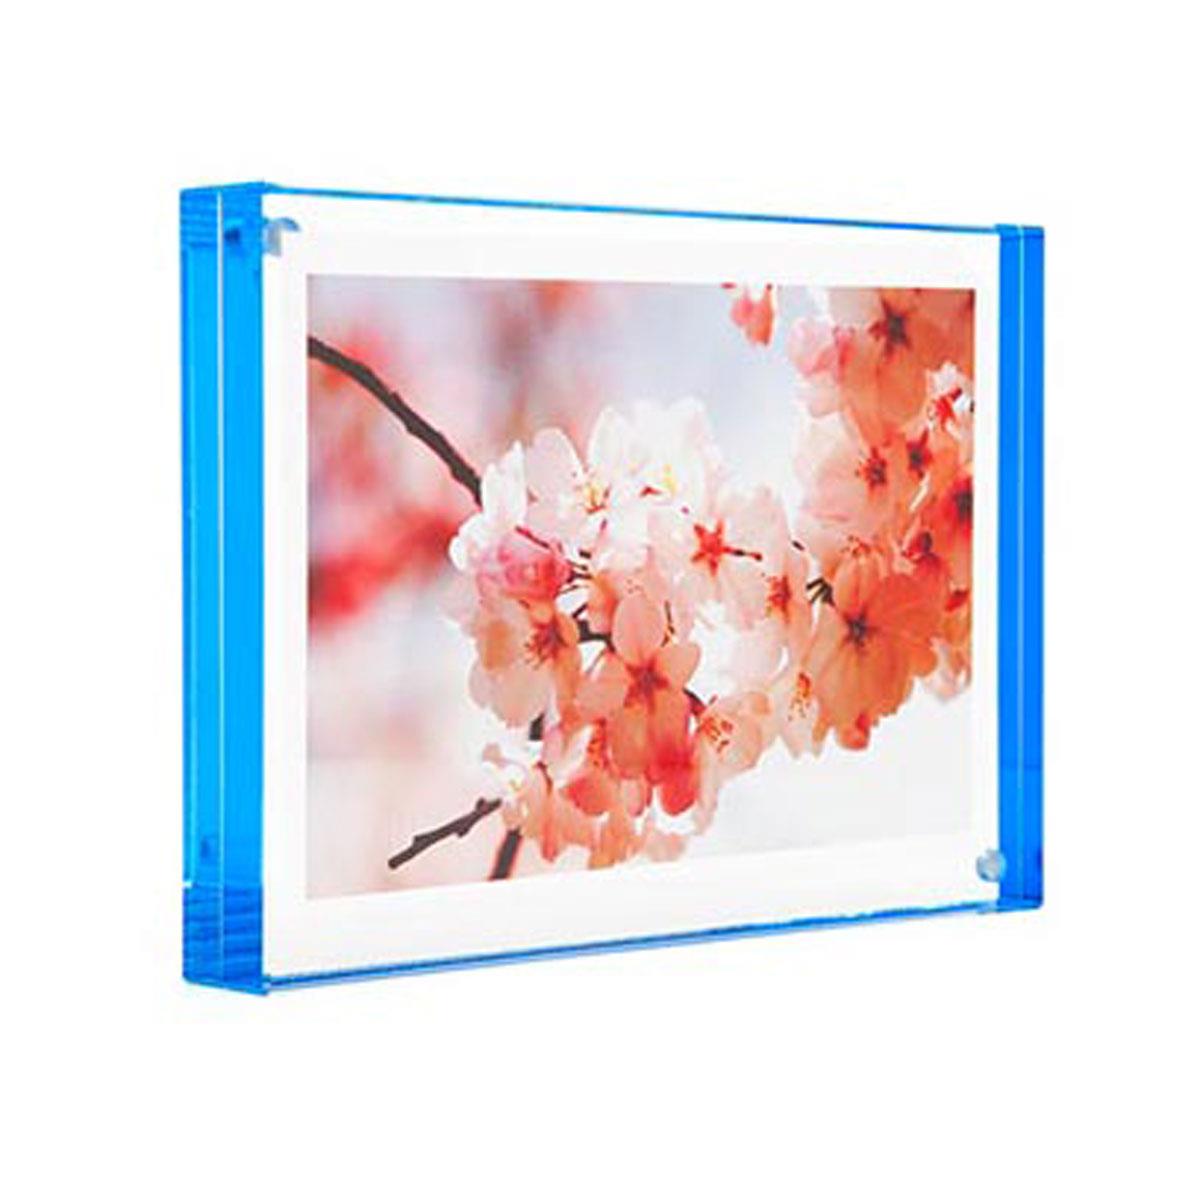 Image of Canetti Color Edge Magnet Frame